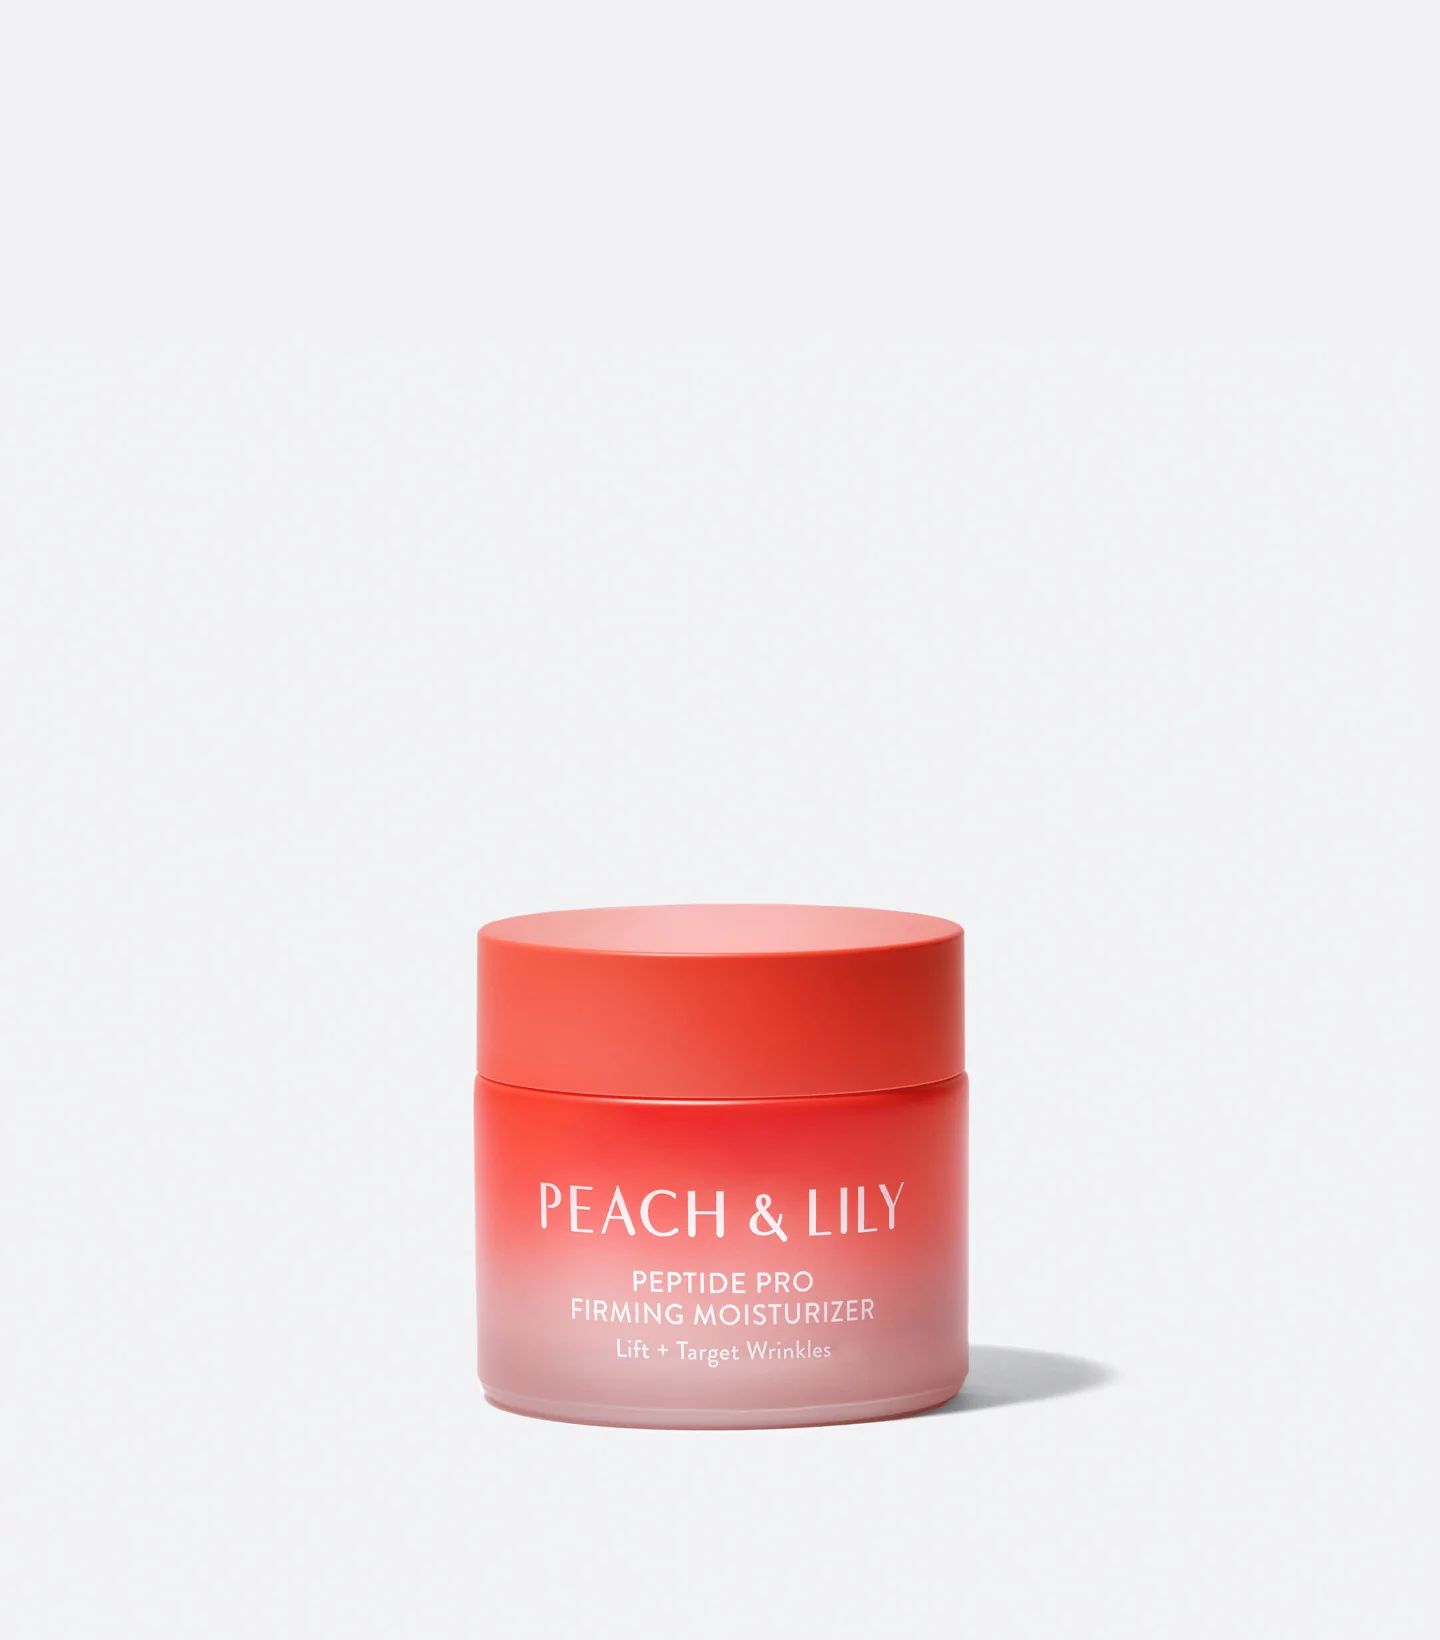 Peptide Pro Firming Moisturizer | Peach and Lily, Inc.